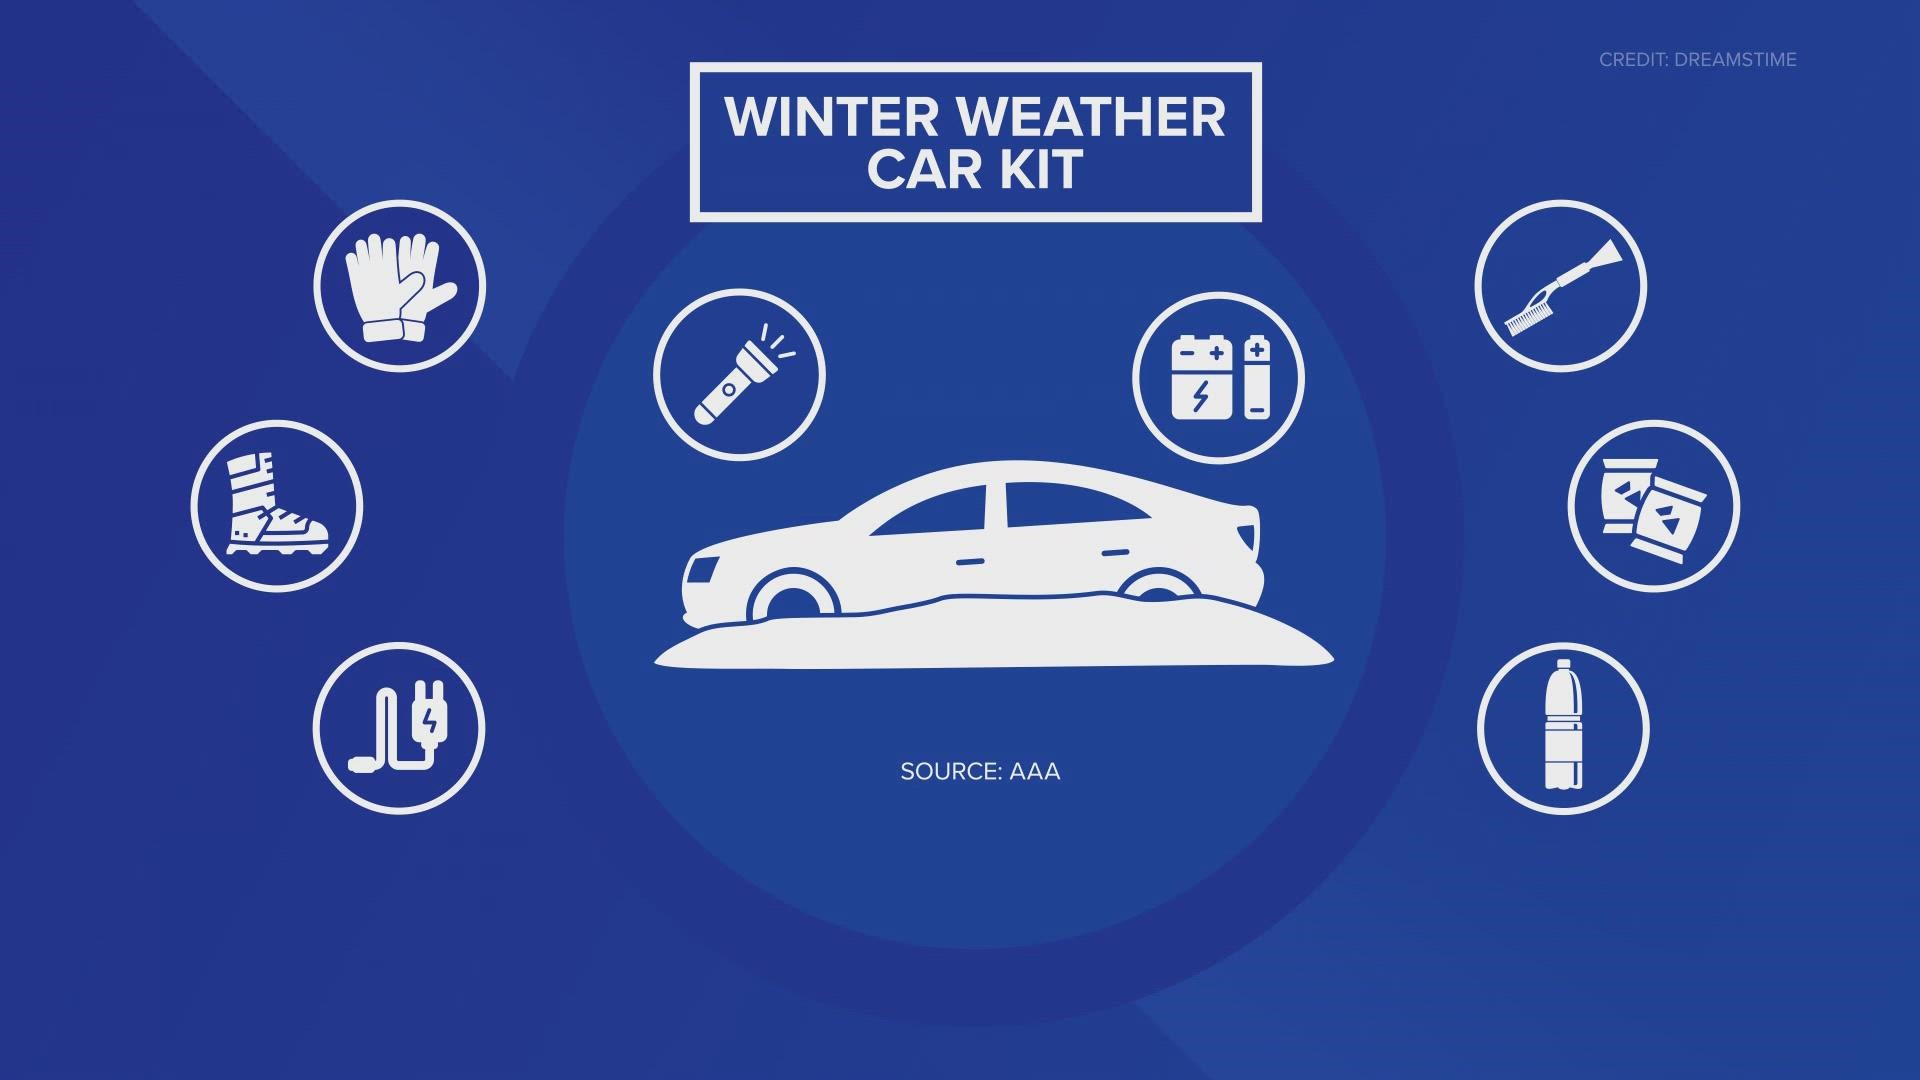 Preparing for cold weather: How to stay warm, create emergency car